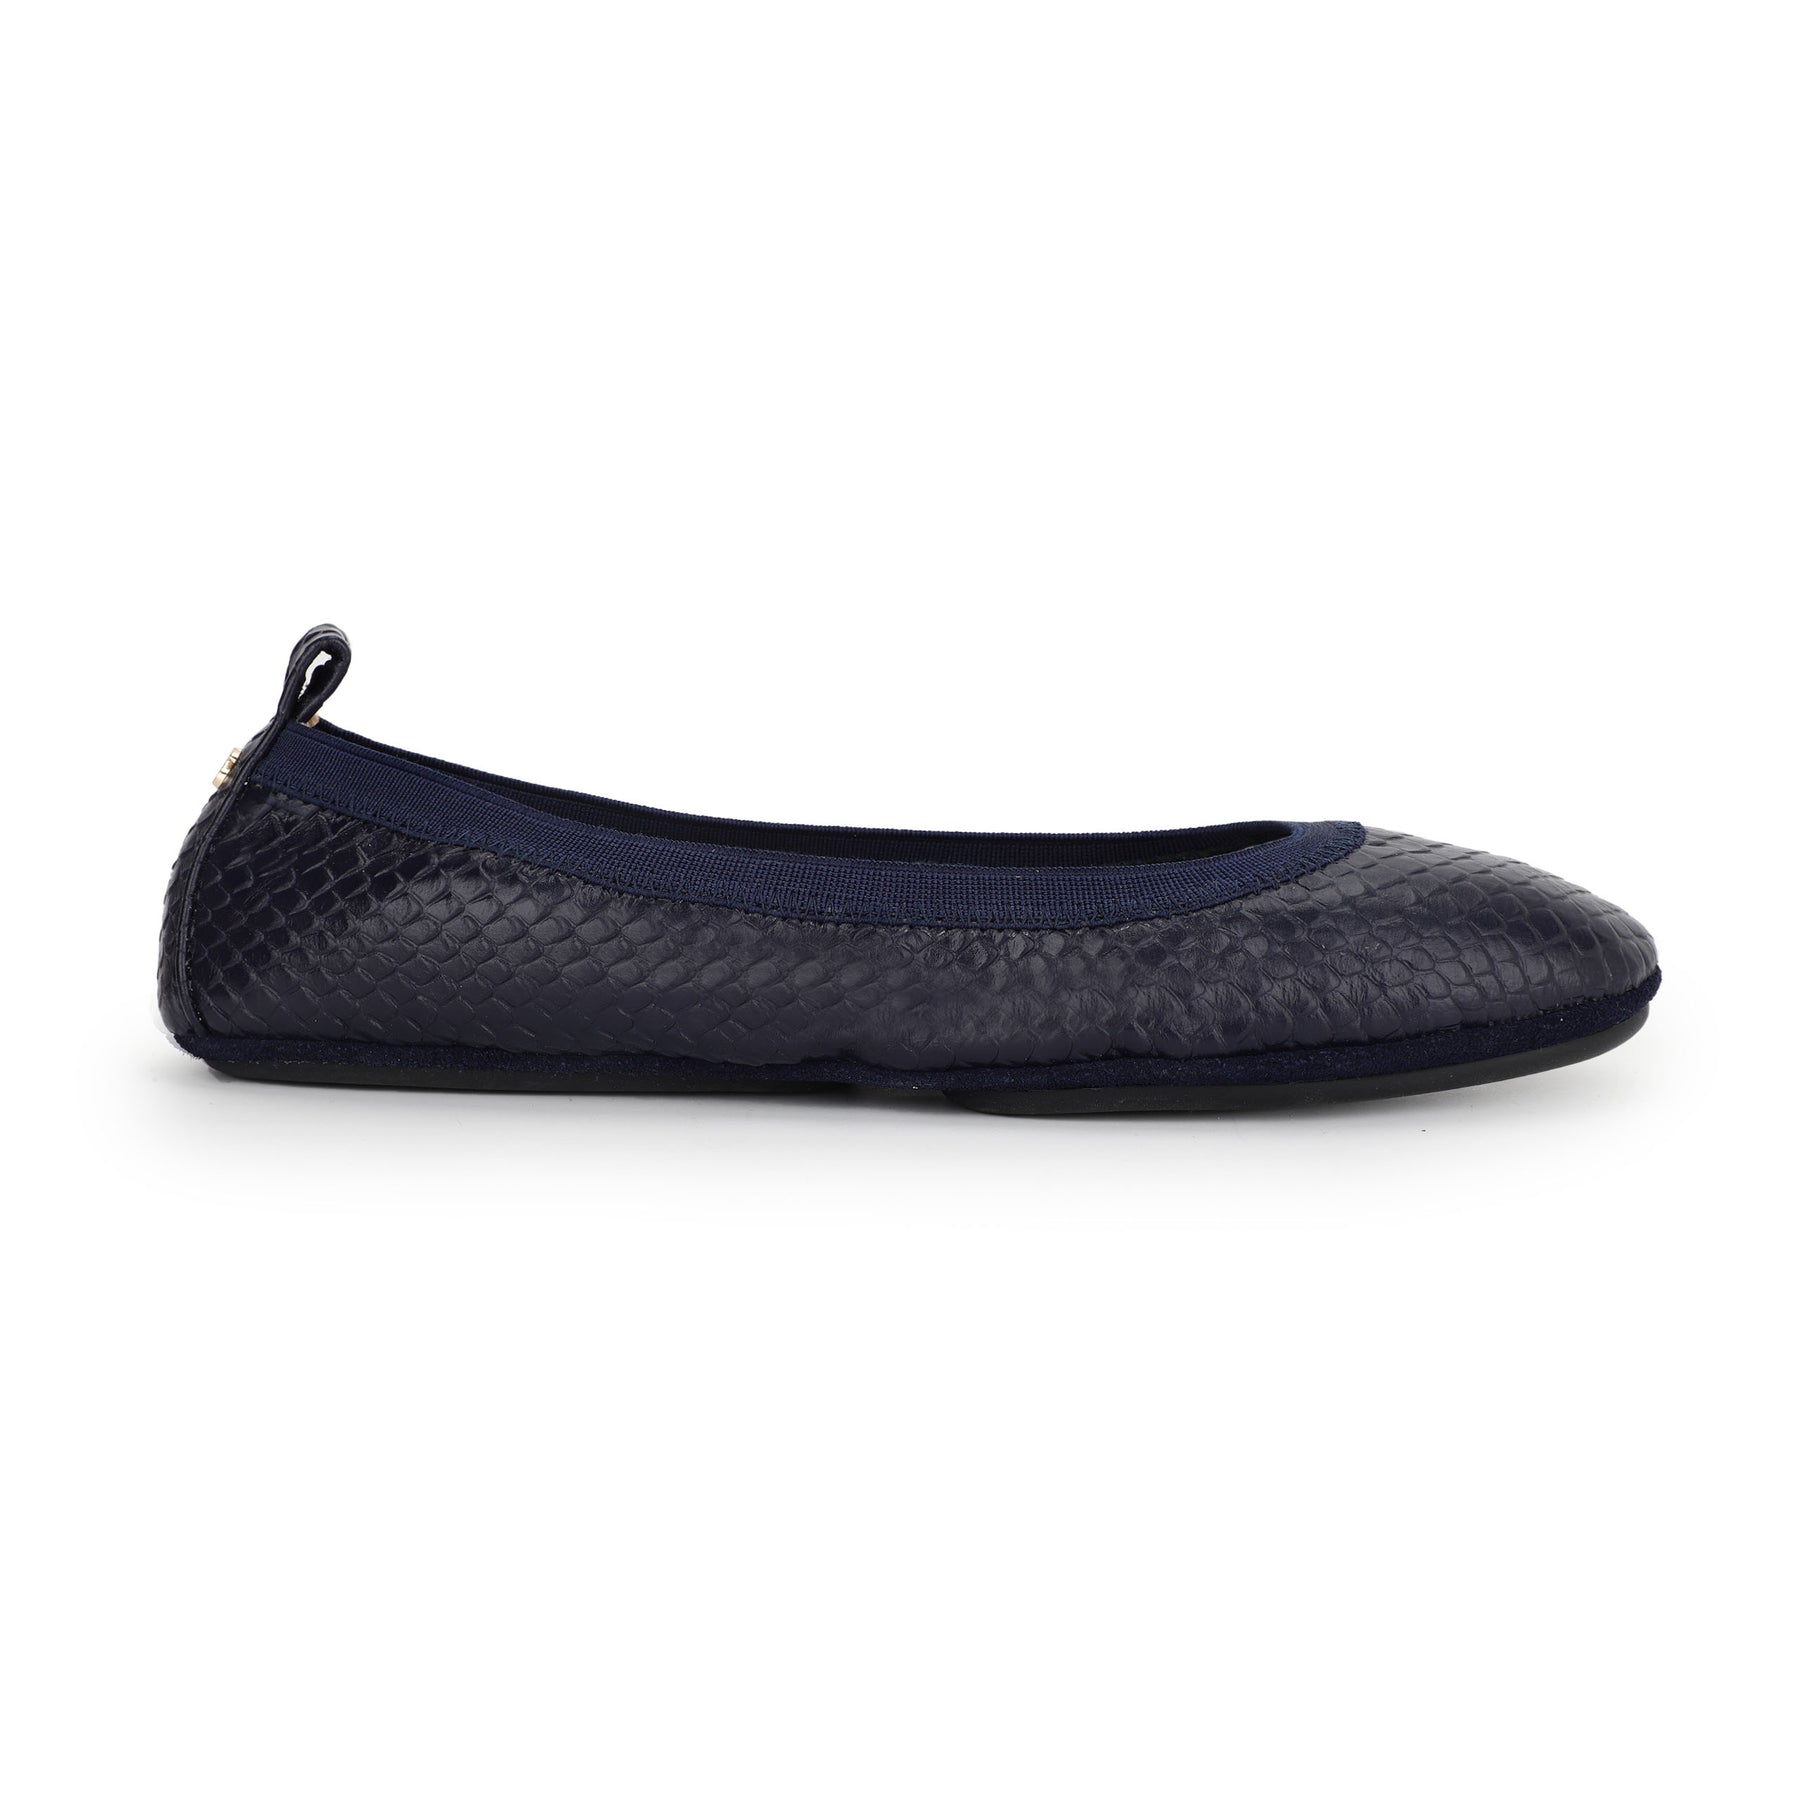 Samara Foldable Ballet Flat in Midnight Blue Scale Leather